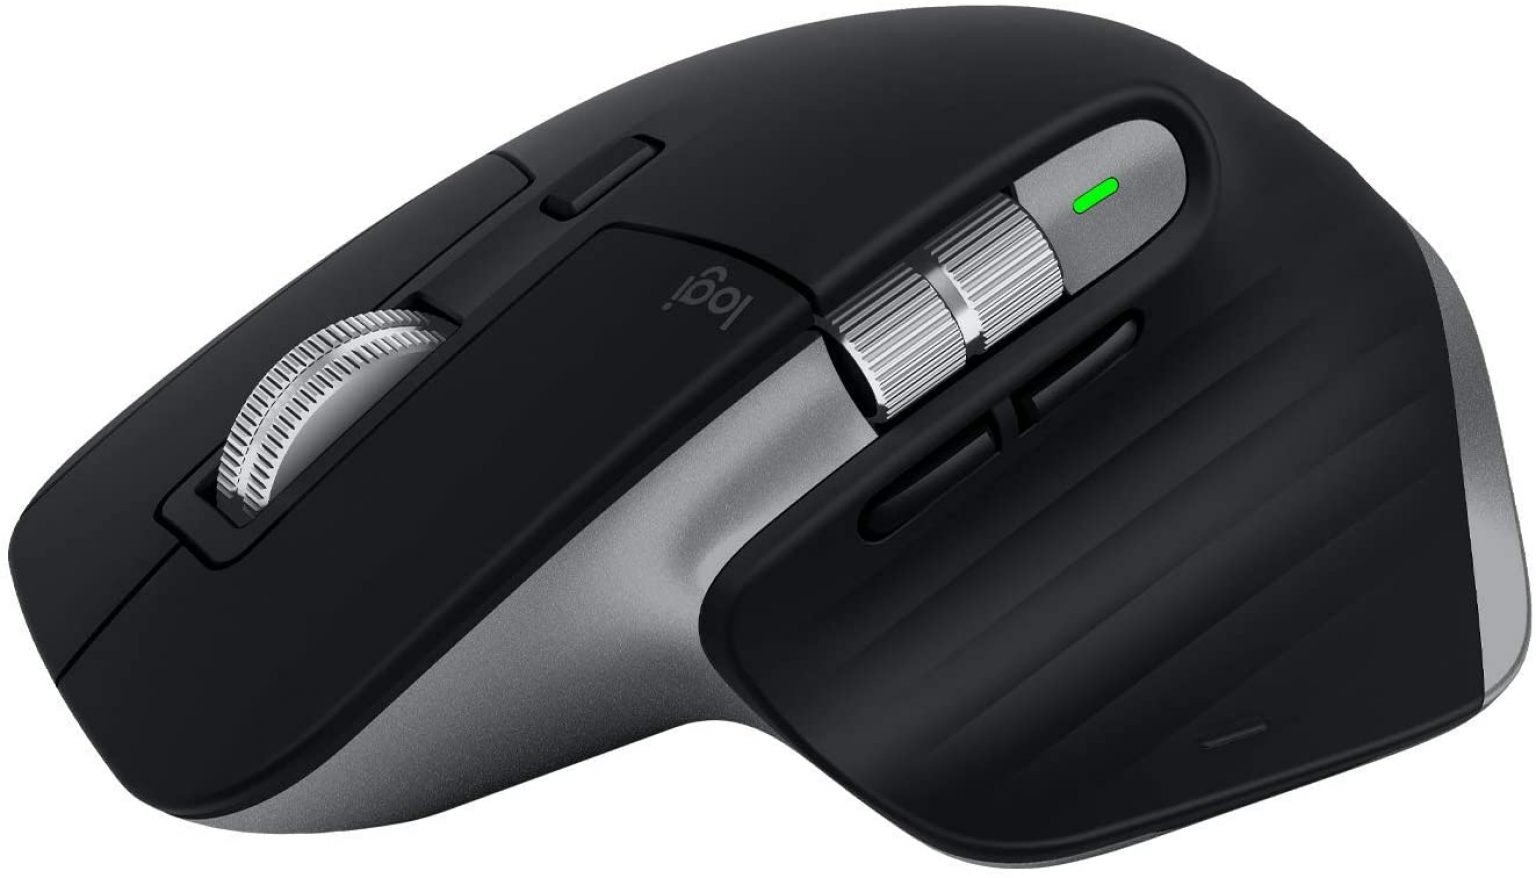 best mouse for macbook pro 2019